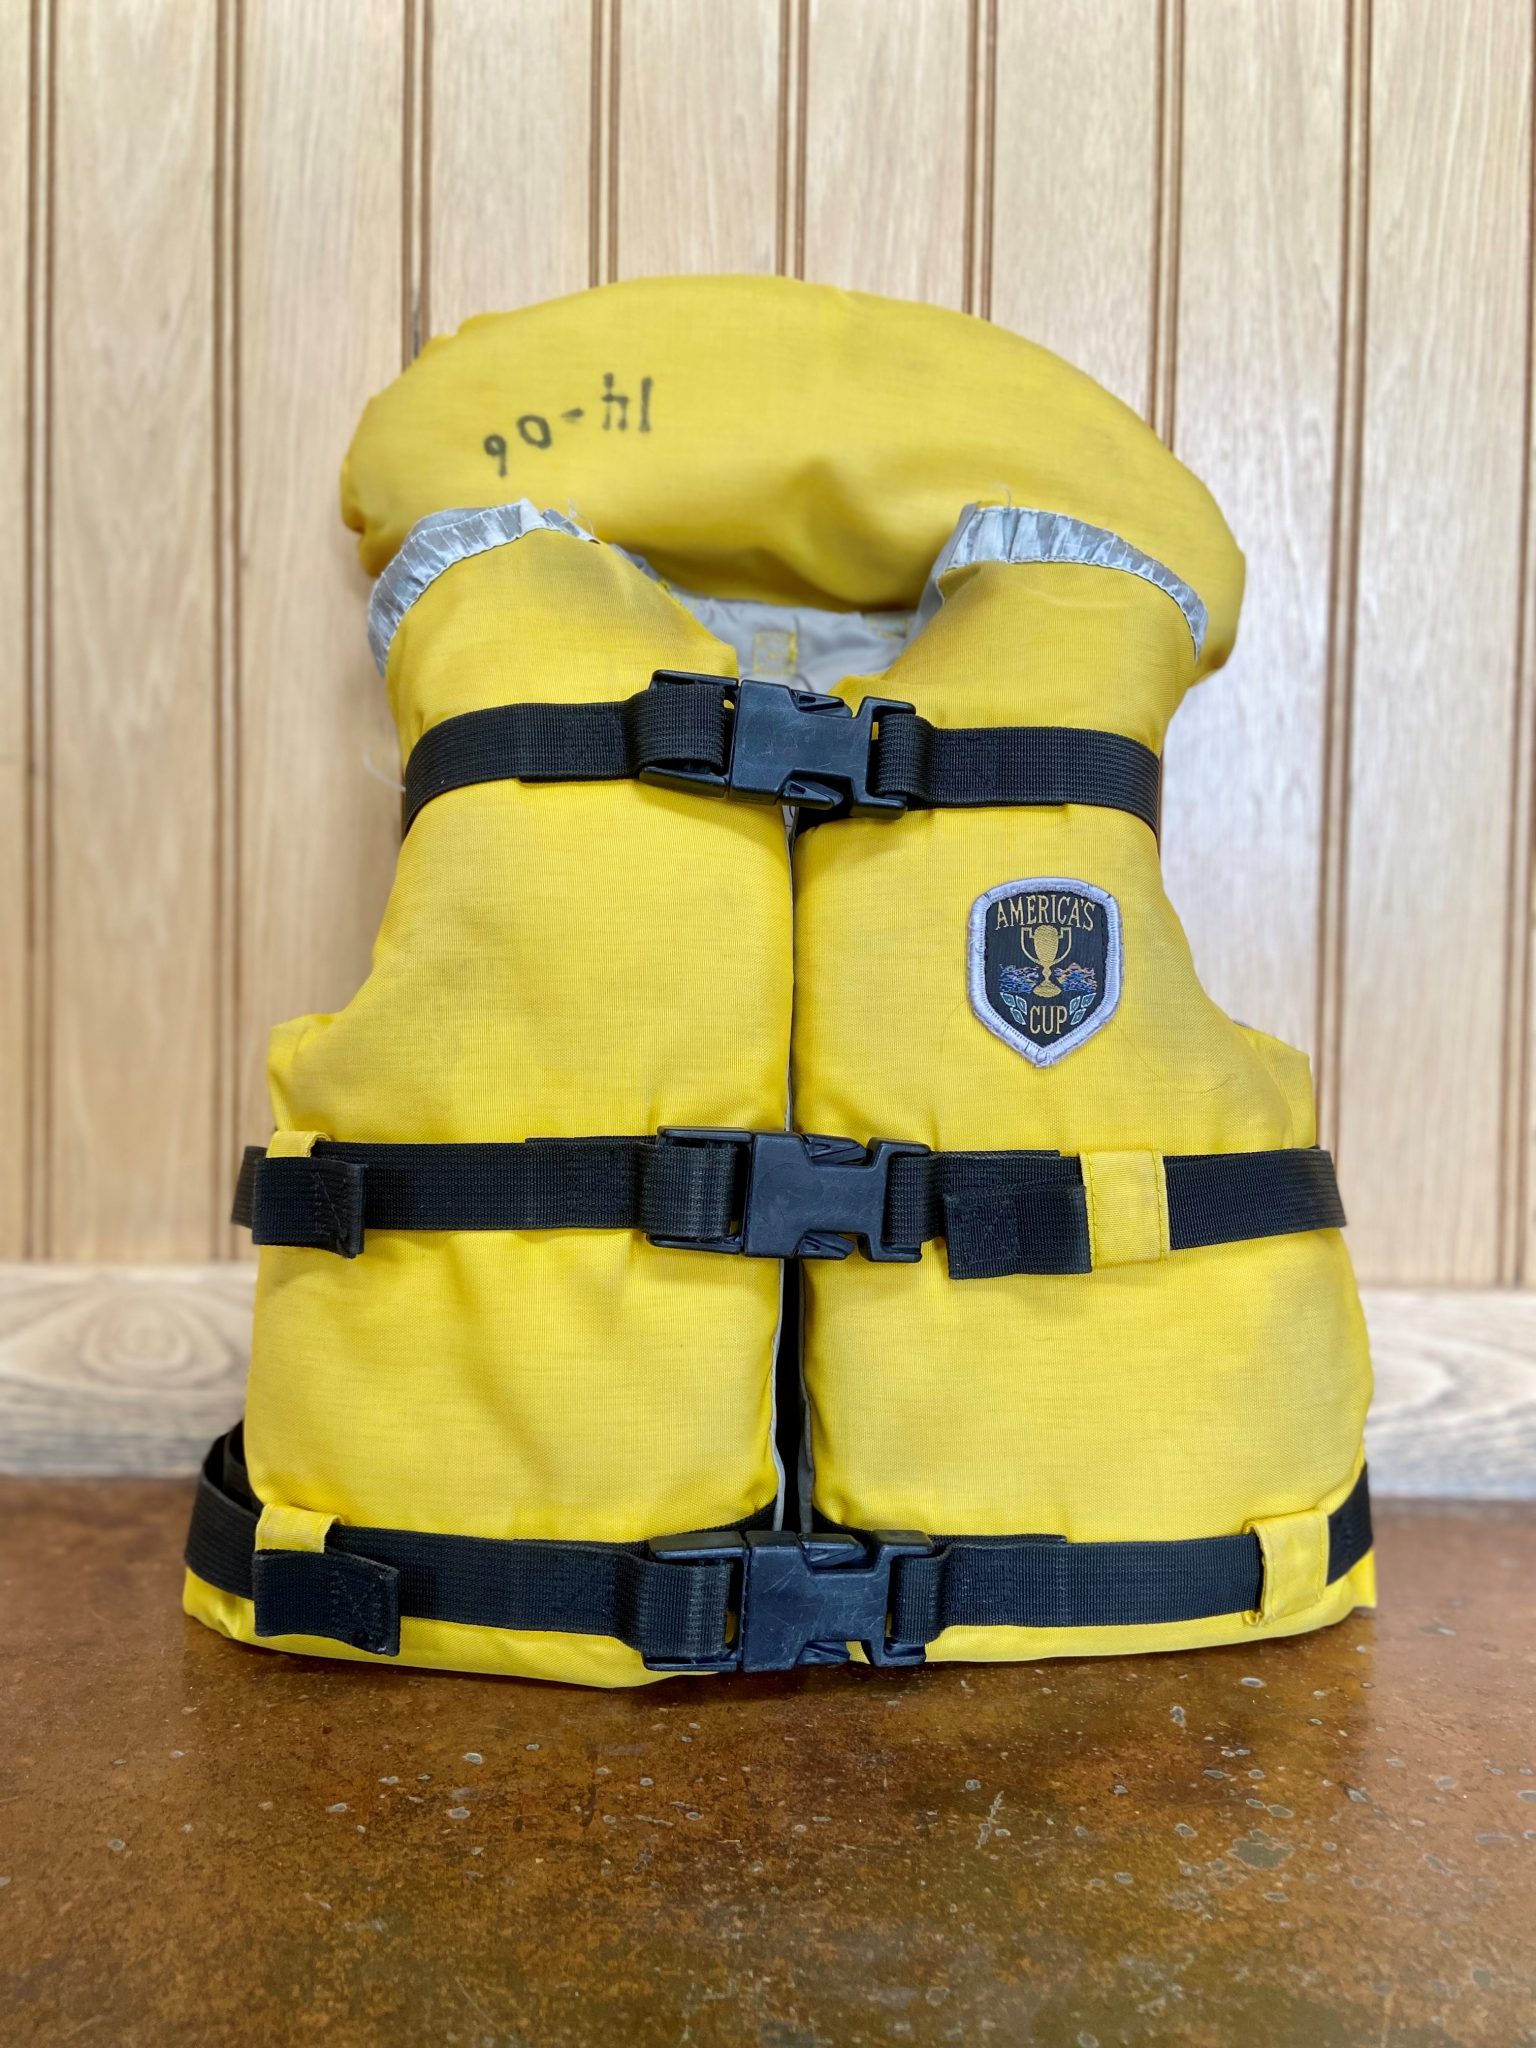 Used Rafting Equipment For Sale | Wilderness Aware Rafting